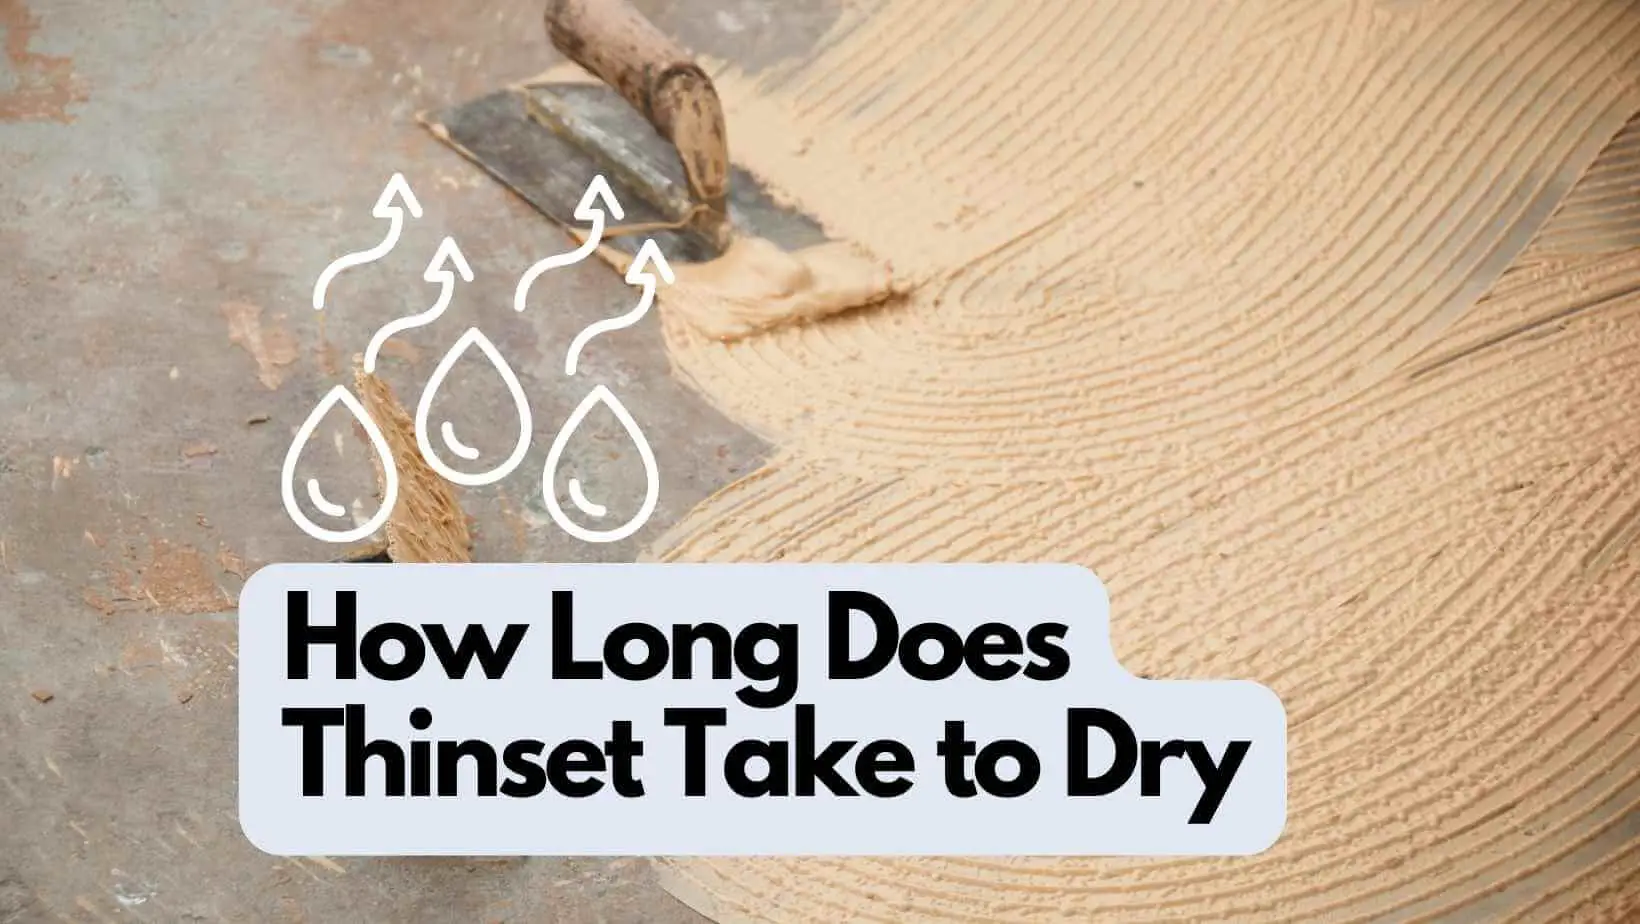 How long does thinset take to dry